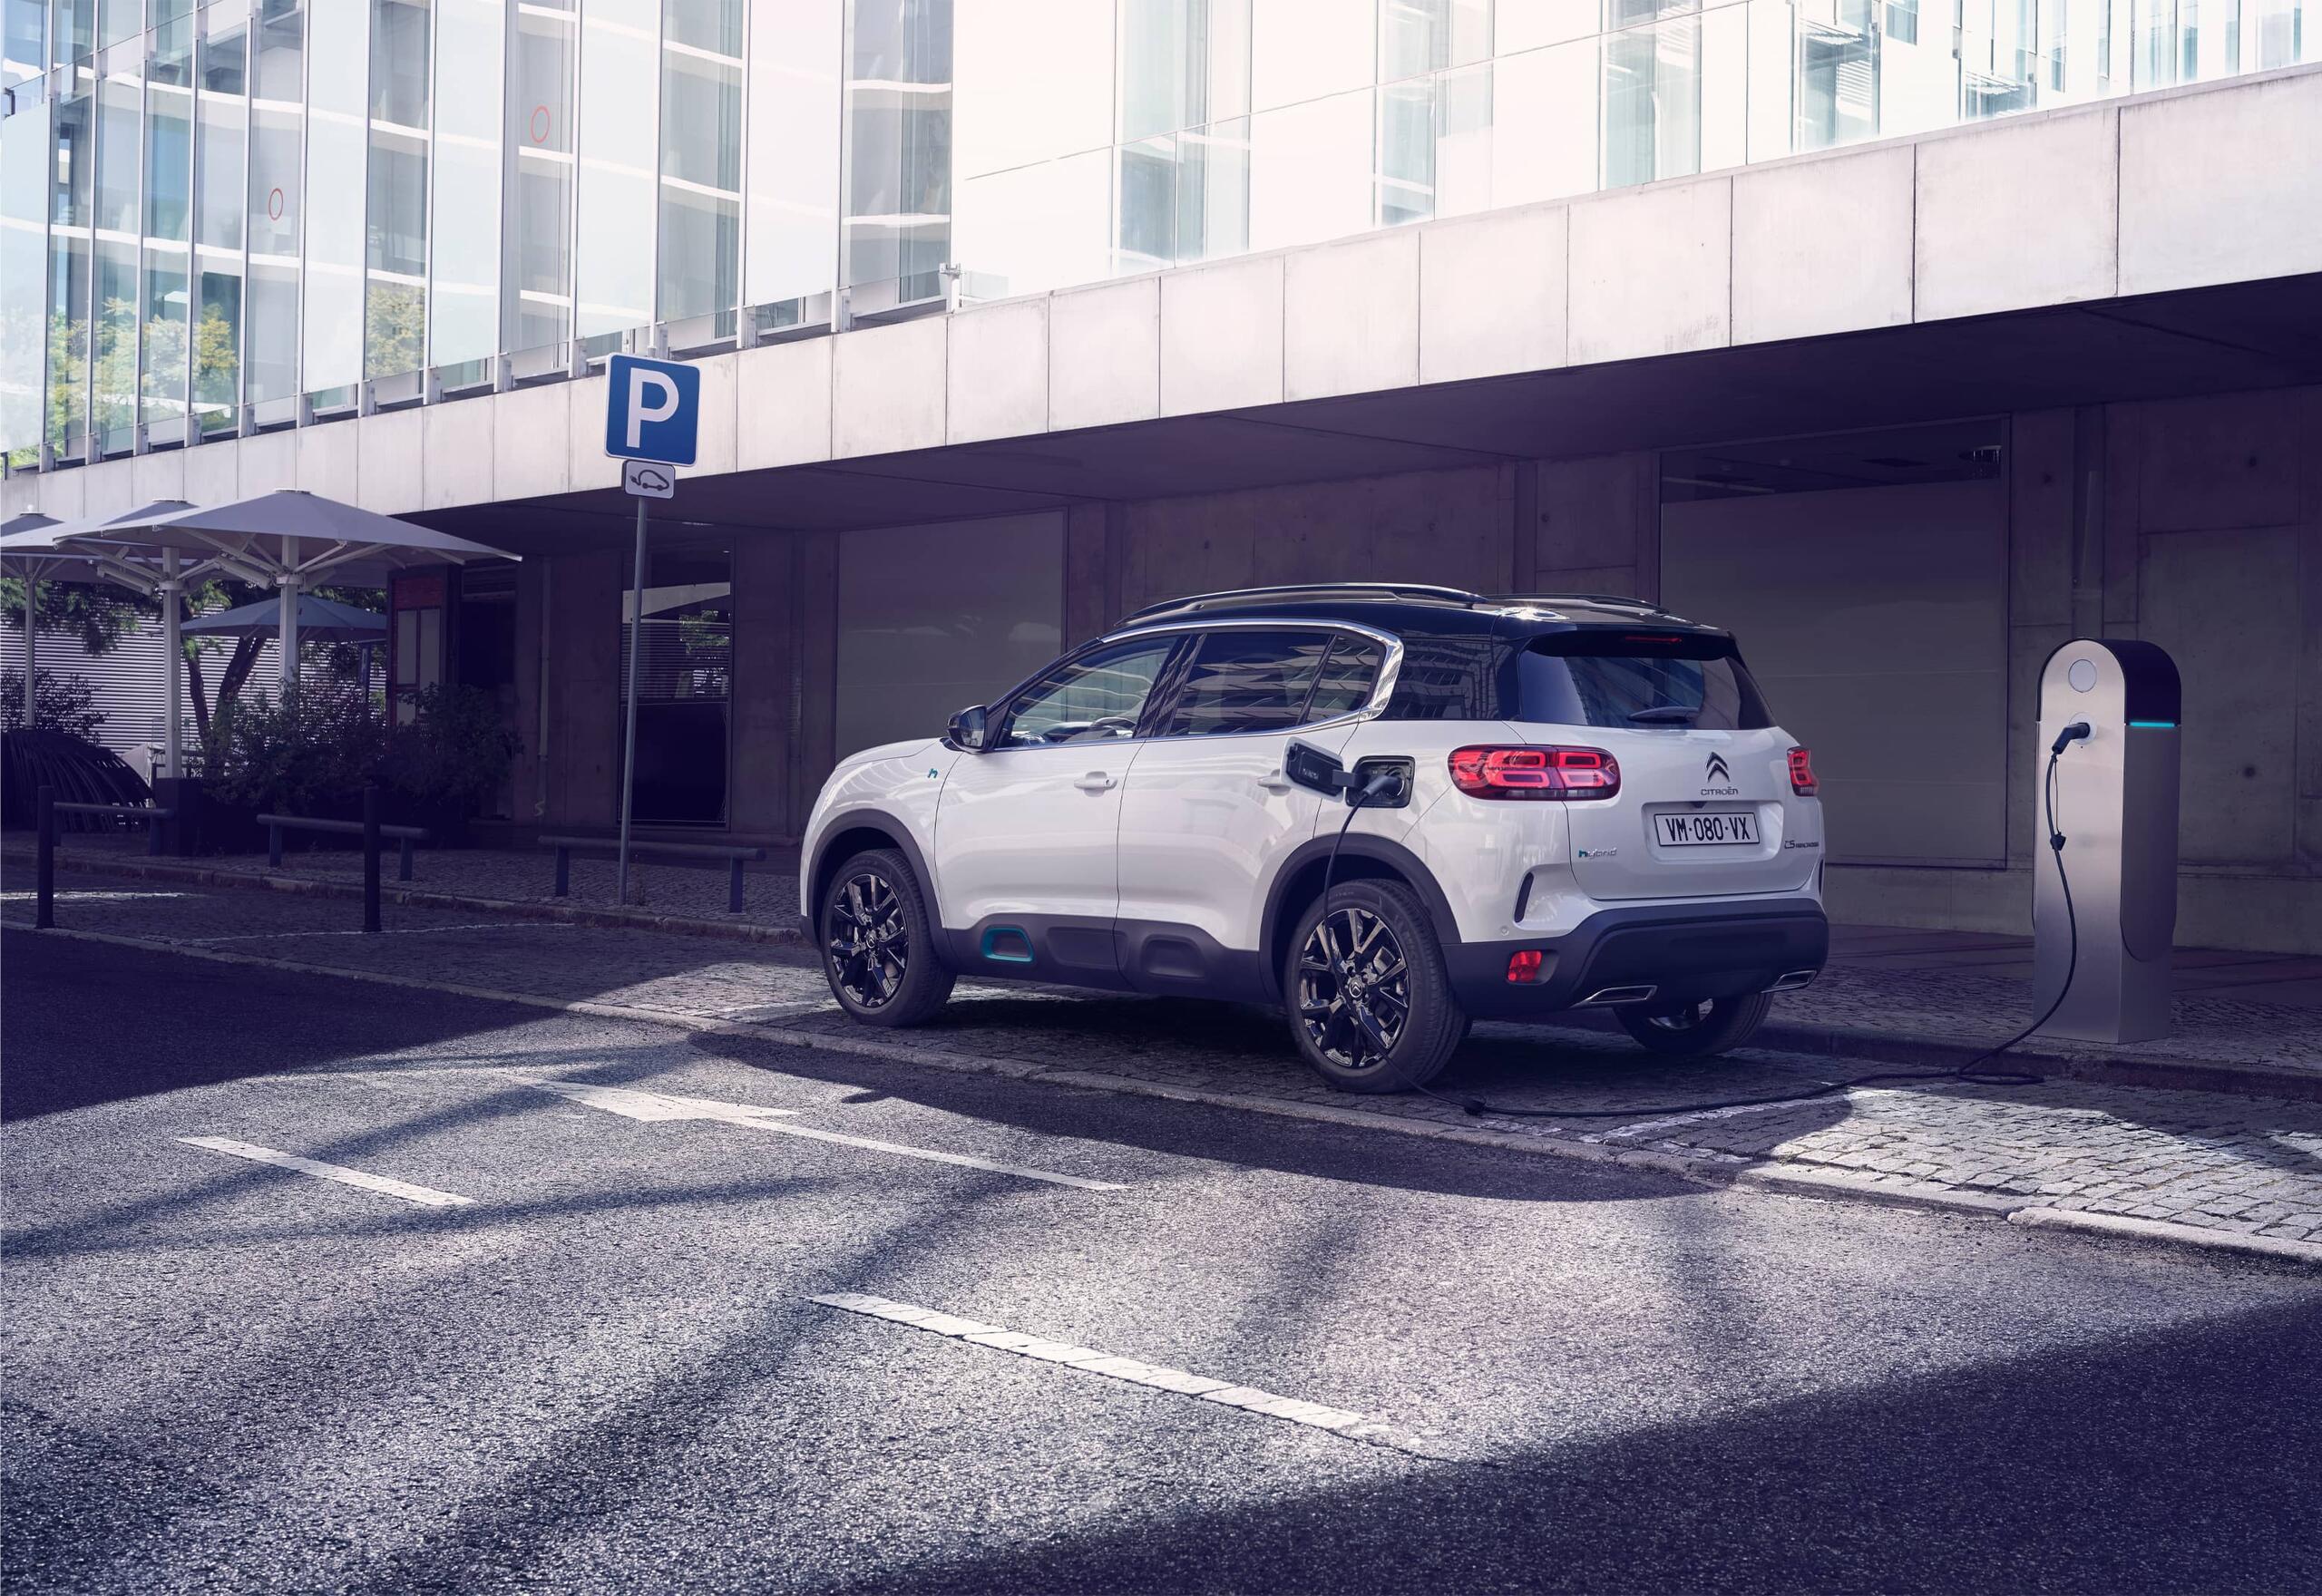 C5 Aircross Hybrid charging at public charging station